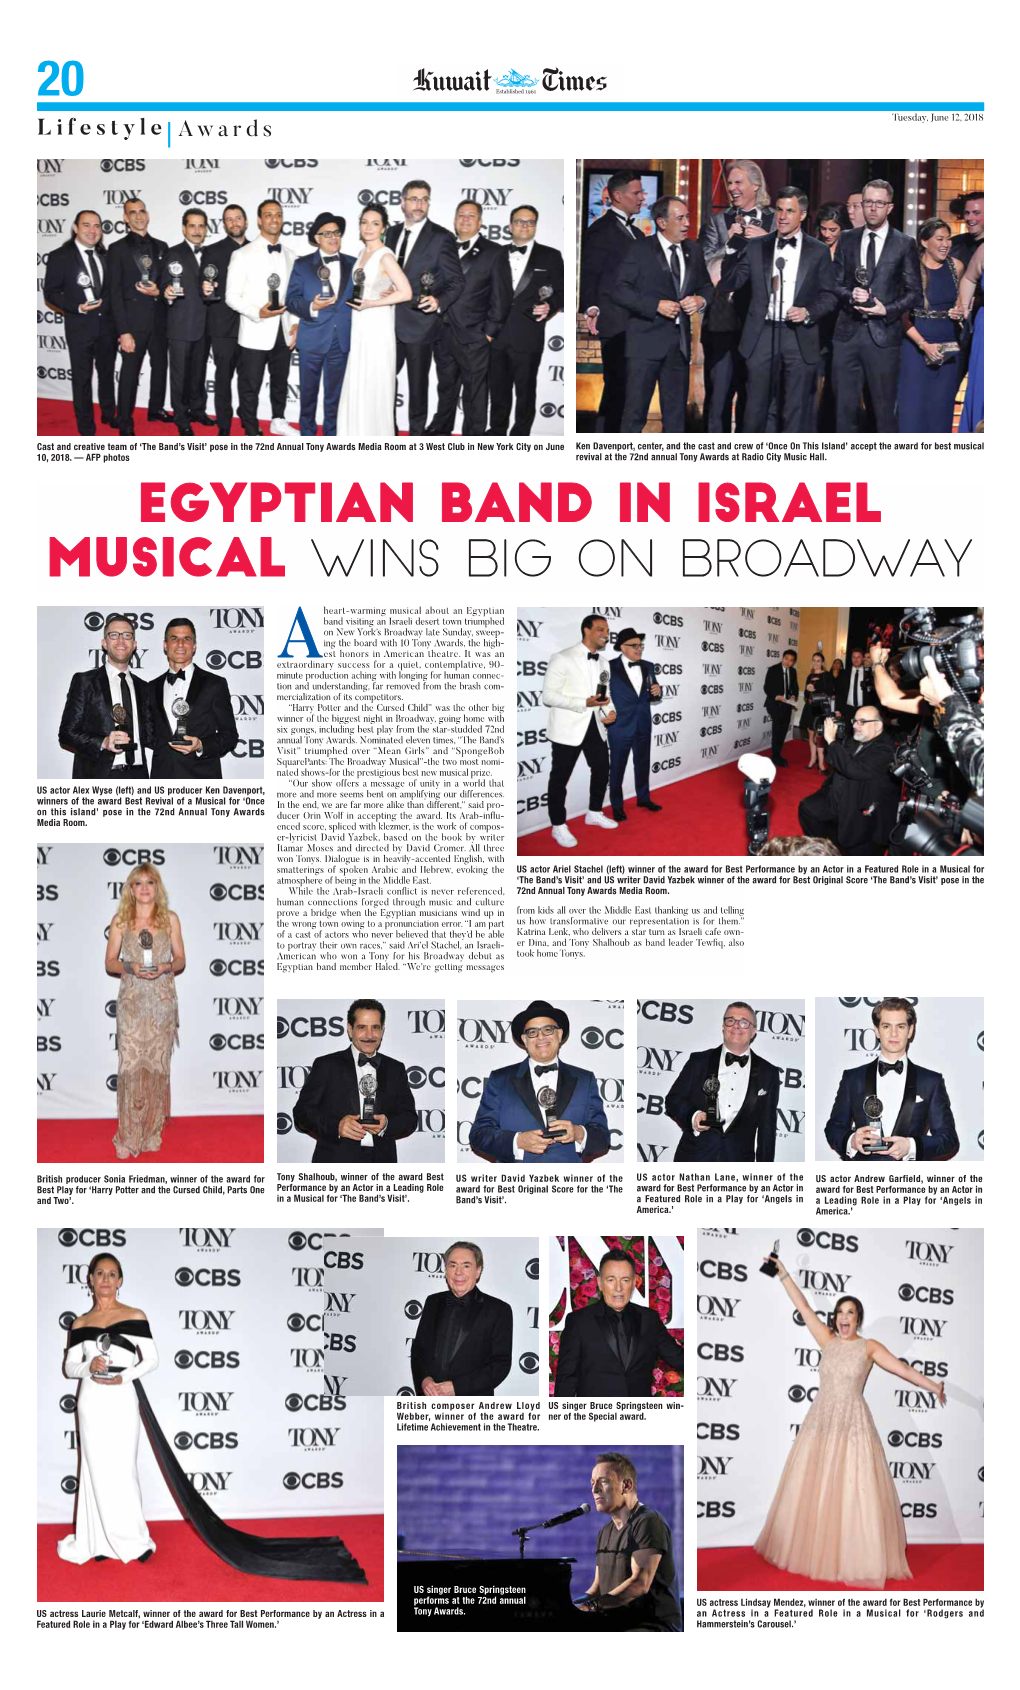 Egyptian Band in Israel Musical Wins Big on Broadway